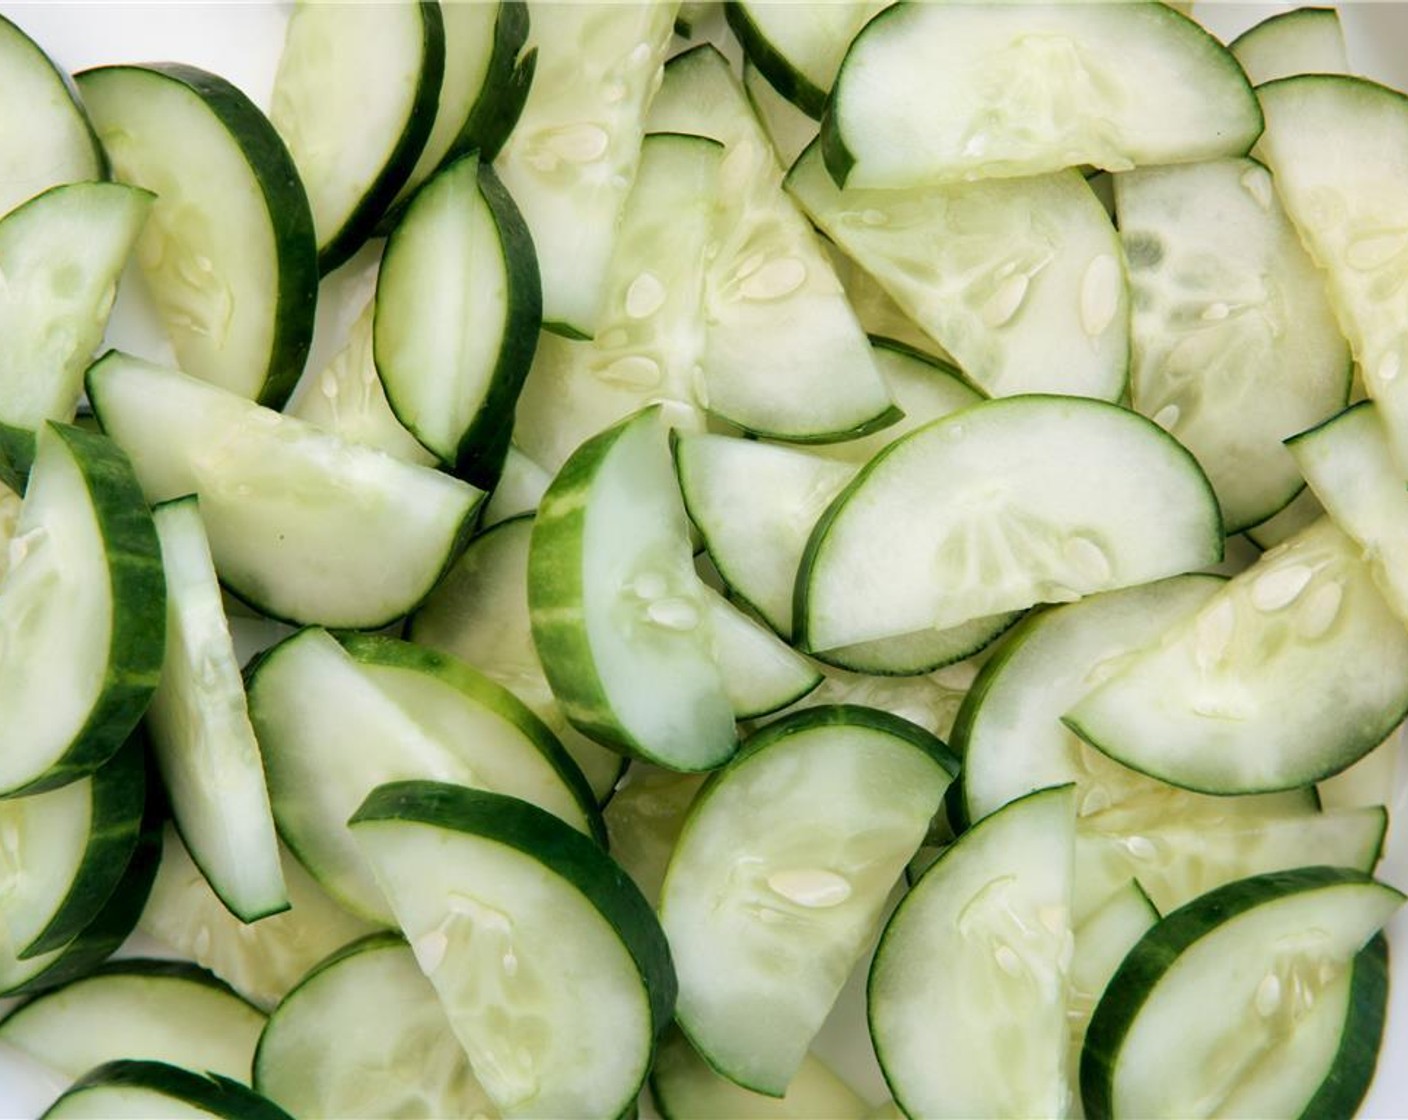 step 5 As the oven preheats, make the minted creamy cucumbers. Mix the sliced cucumber and Kosher Salt (1/2 tsp) in a colander or strainer, over the sink or a bowl. Let stand 10-15 minutes. Then squeeze the slices gently and dry on  paper towels.